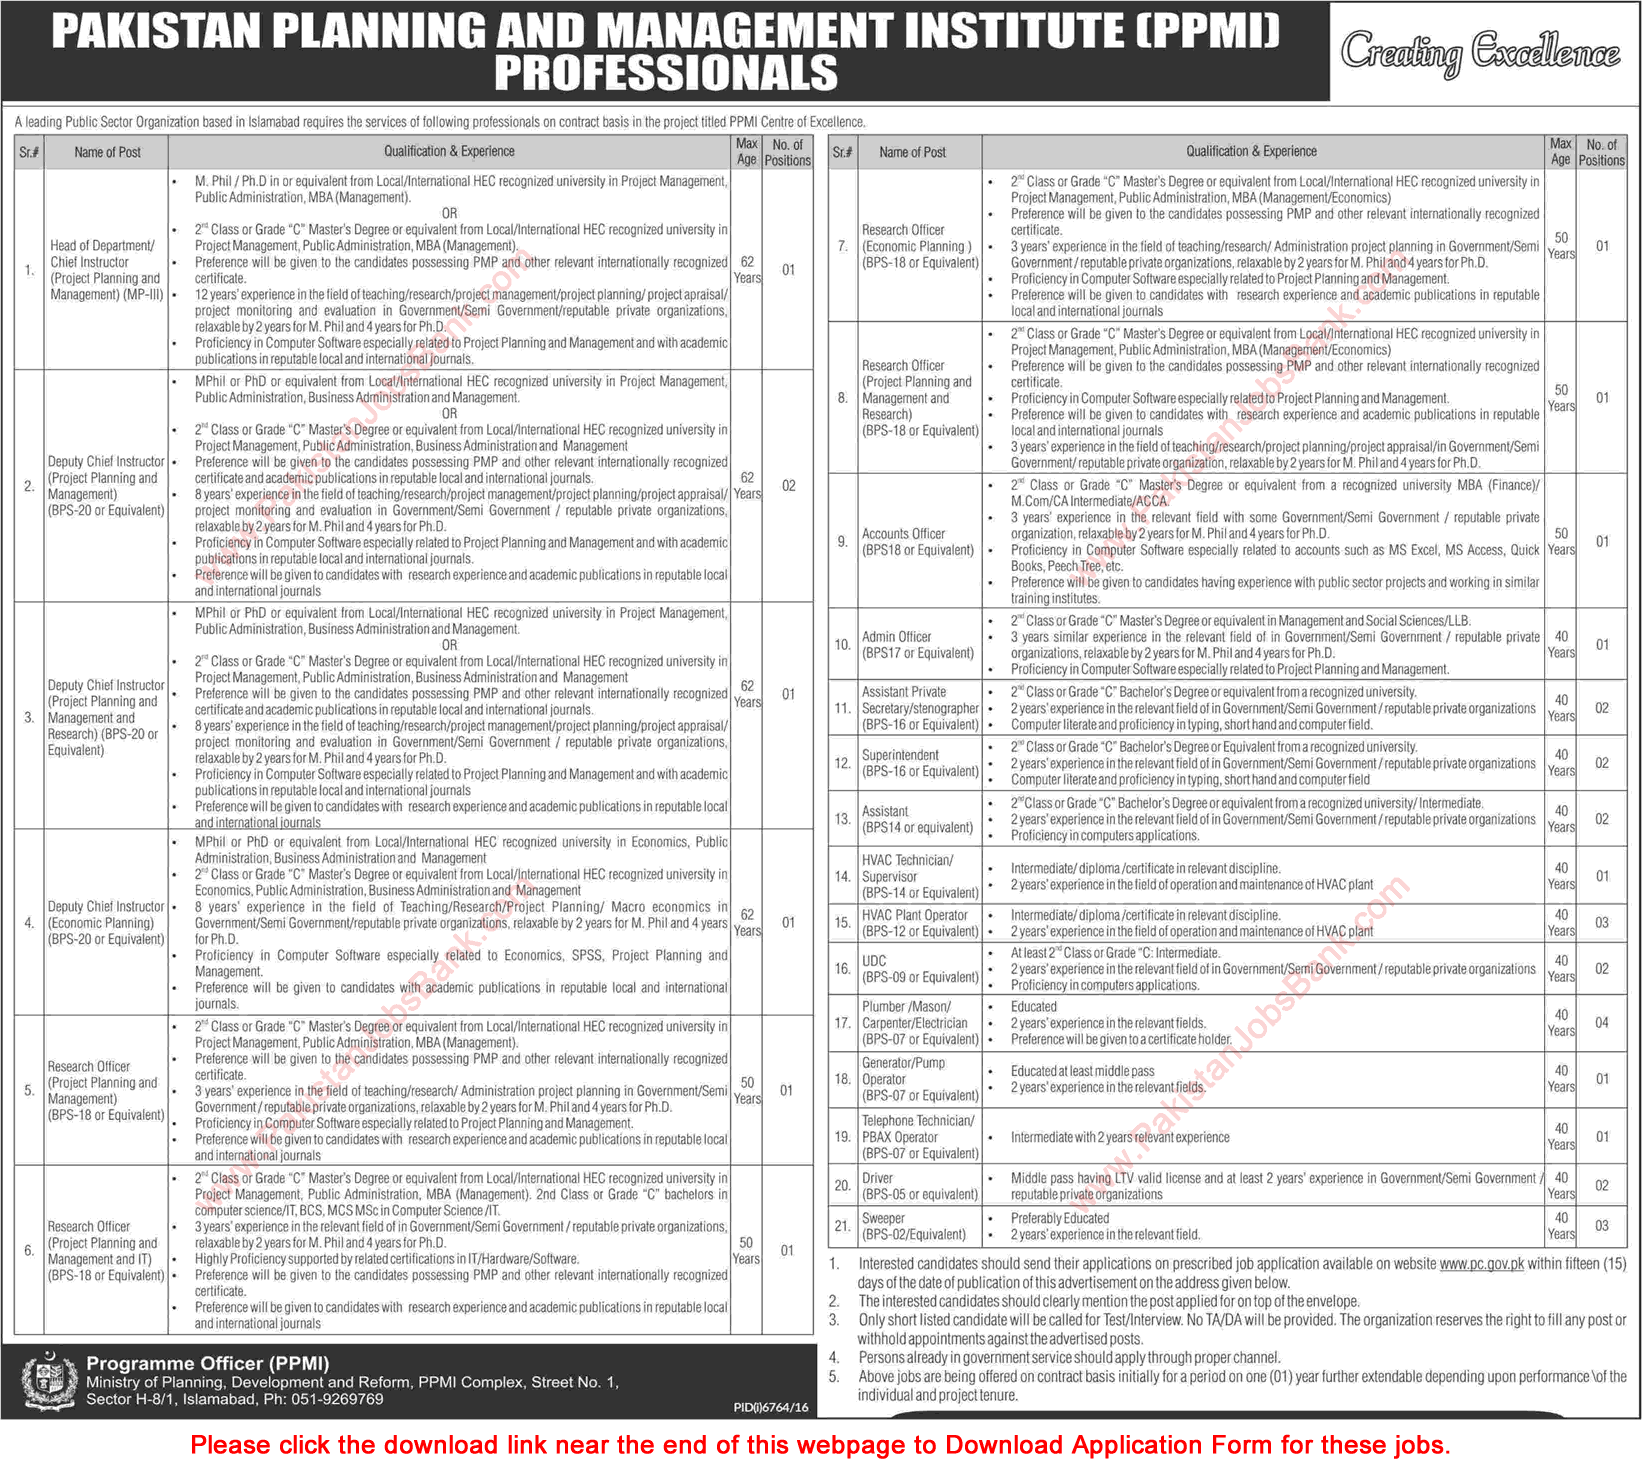 PPMI Islamabad Jobs 2017 June Application Form Pakistan Planning and Management Institute Latest